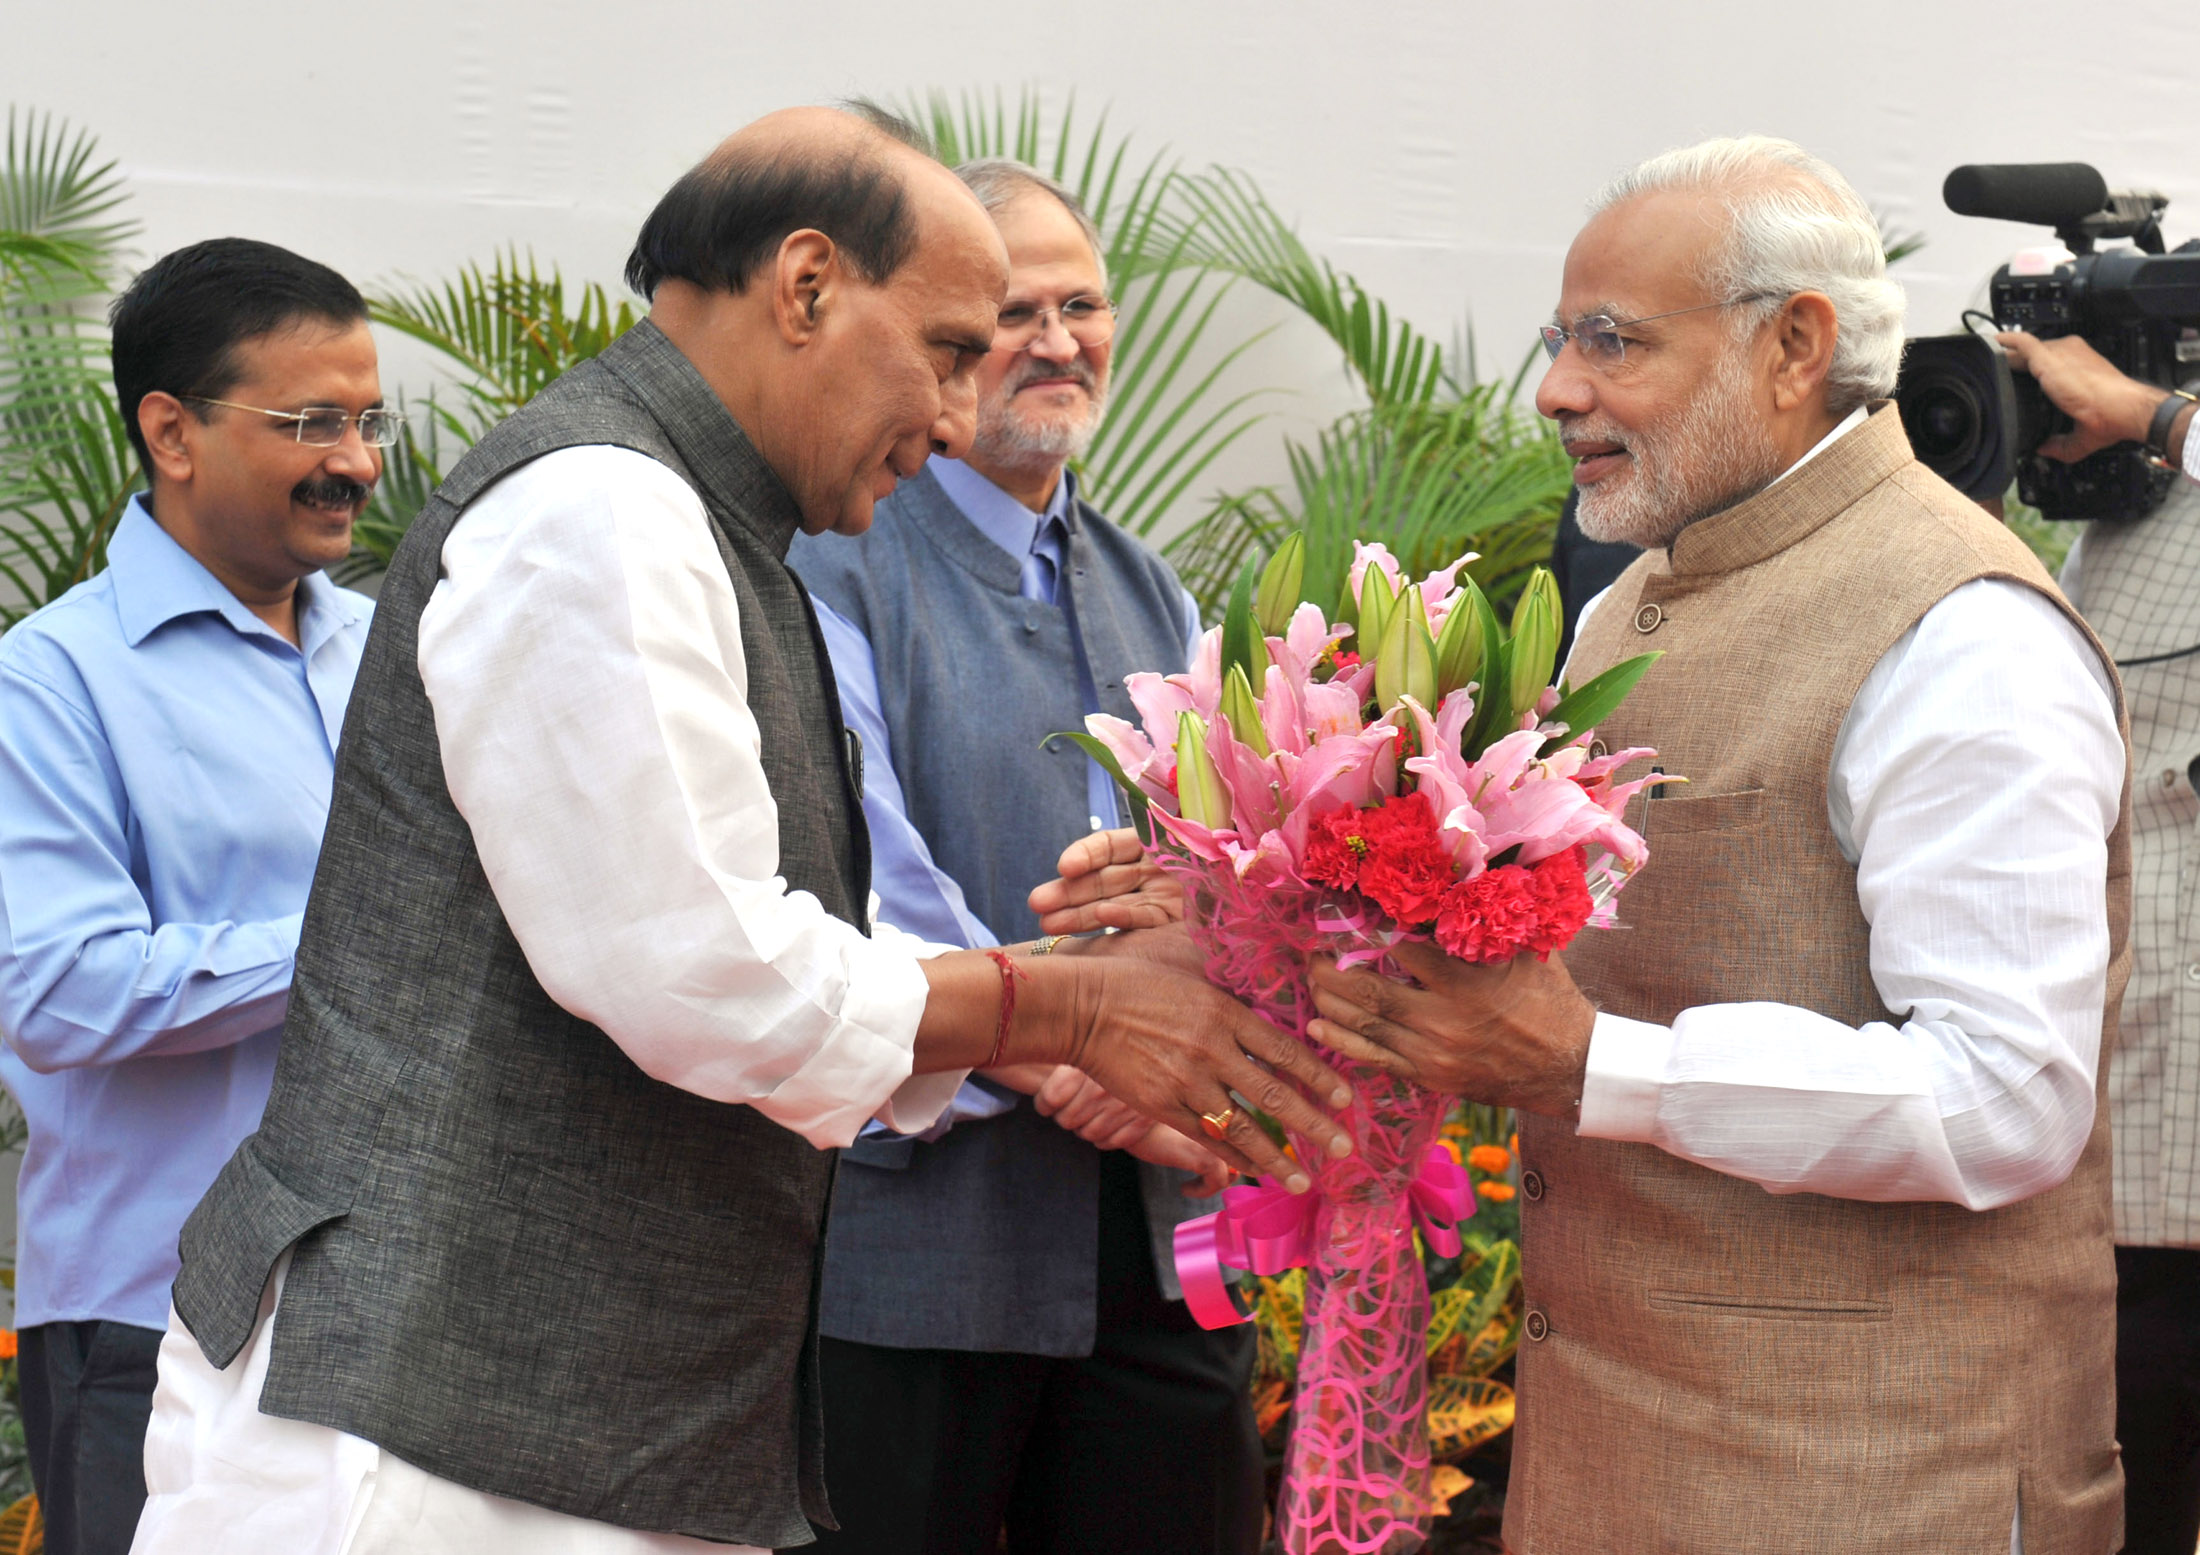 The Prime Minister, Shri Narendra Modi being welcomed by the Union Home Minister, Shri Rajnath Singh, at the Run for Unity event, organised on Rashtriya Ekta Diwas, at Rajpath, in New Delhi on October 31, 2015. 	The Lt. Governor of Delhi, Shri Najeeb Jung and the Chief Minister of Delhi, Shri Arvind Kejriwal are also seen.